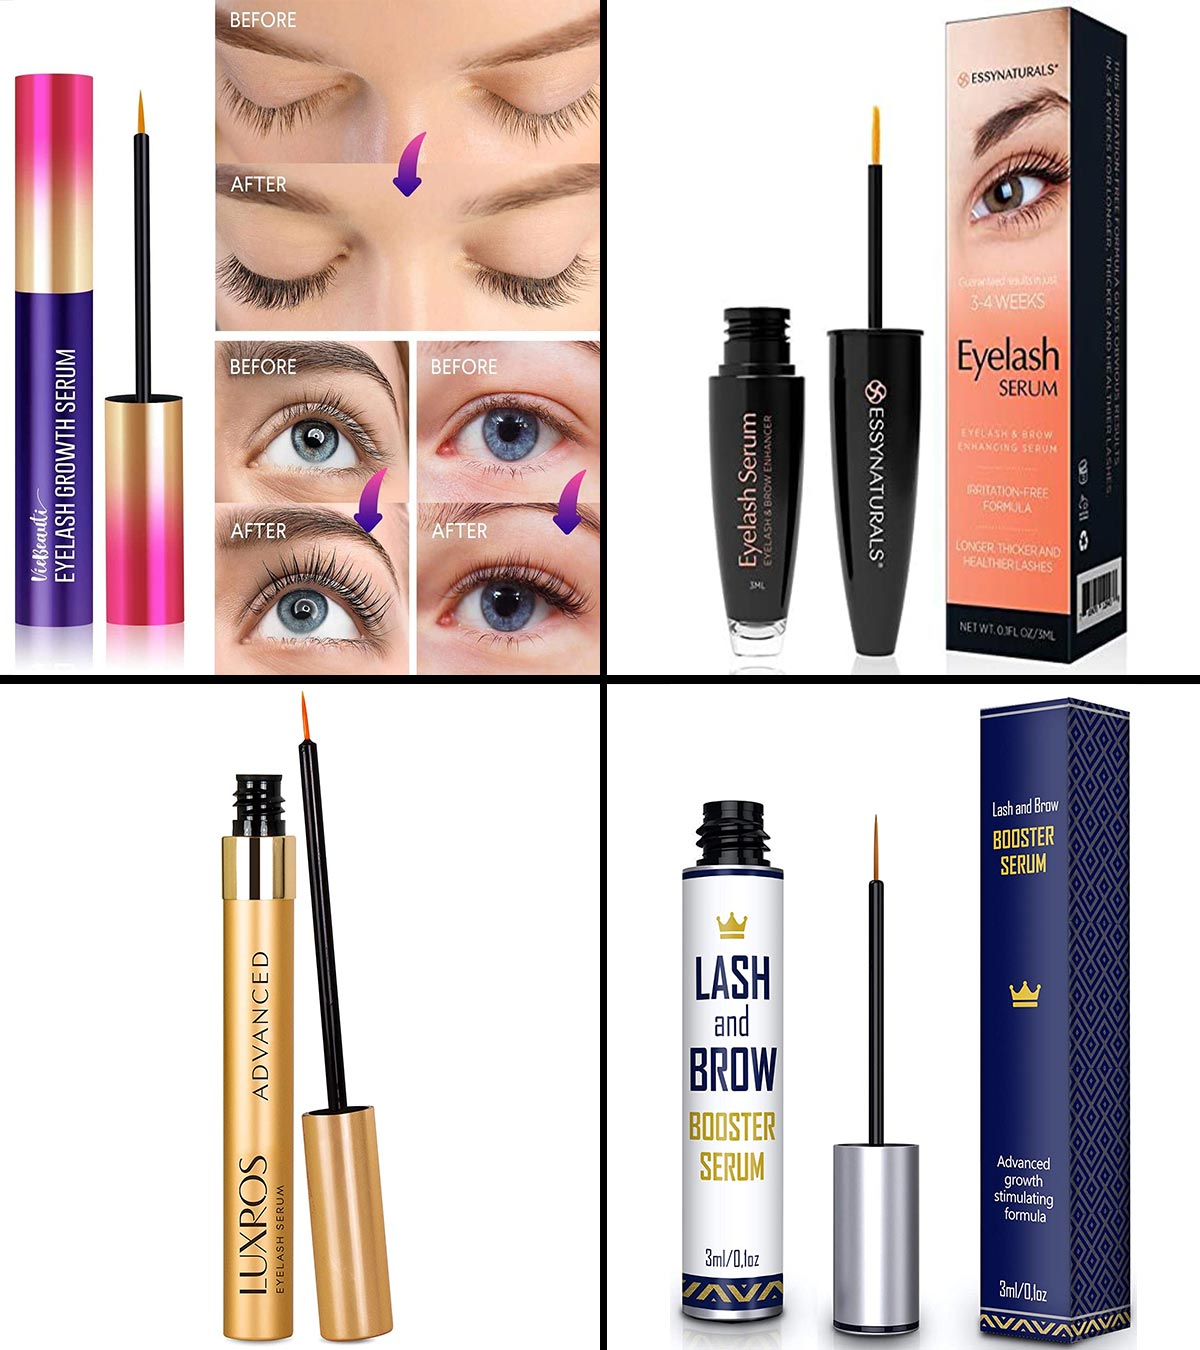 13 Best Eyebrow Growth Serums That Actually Work, Cosmetologist-Approved